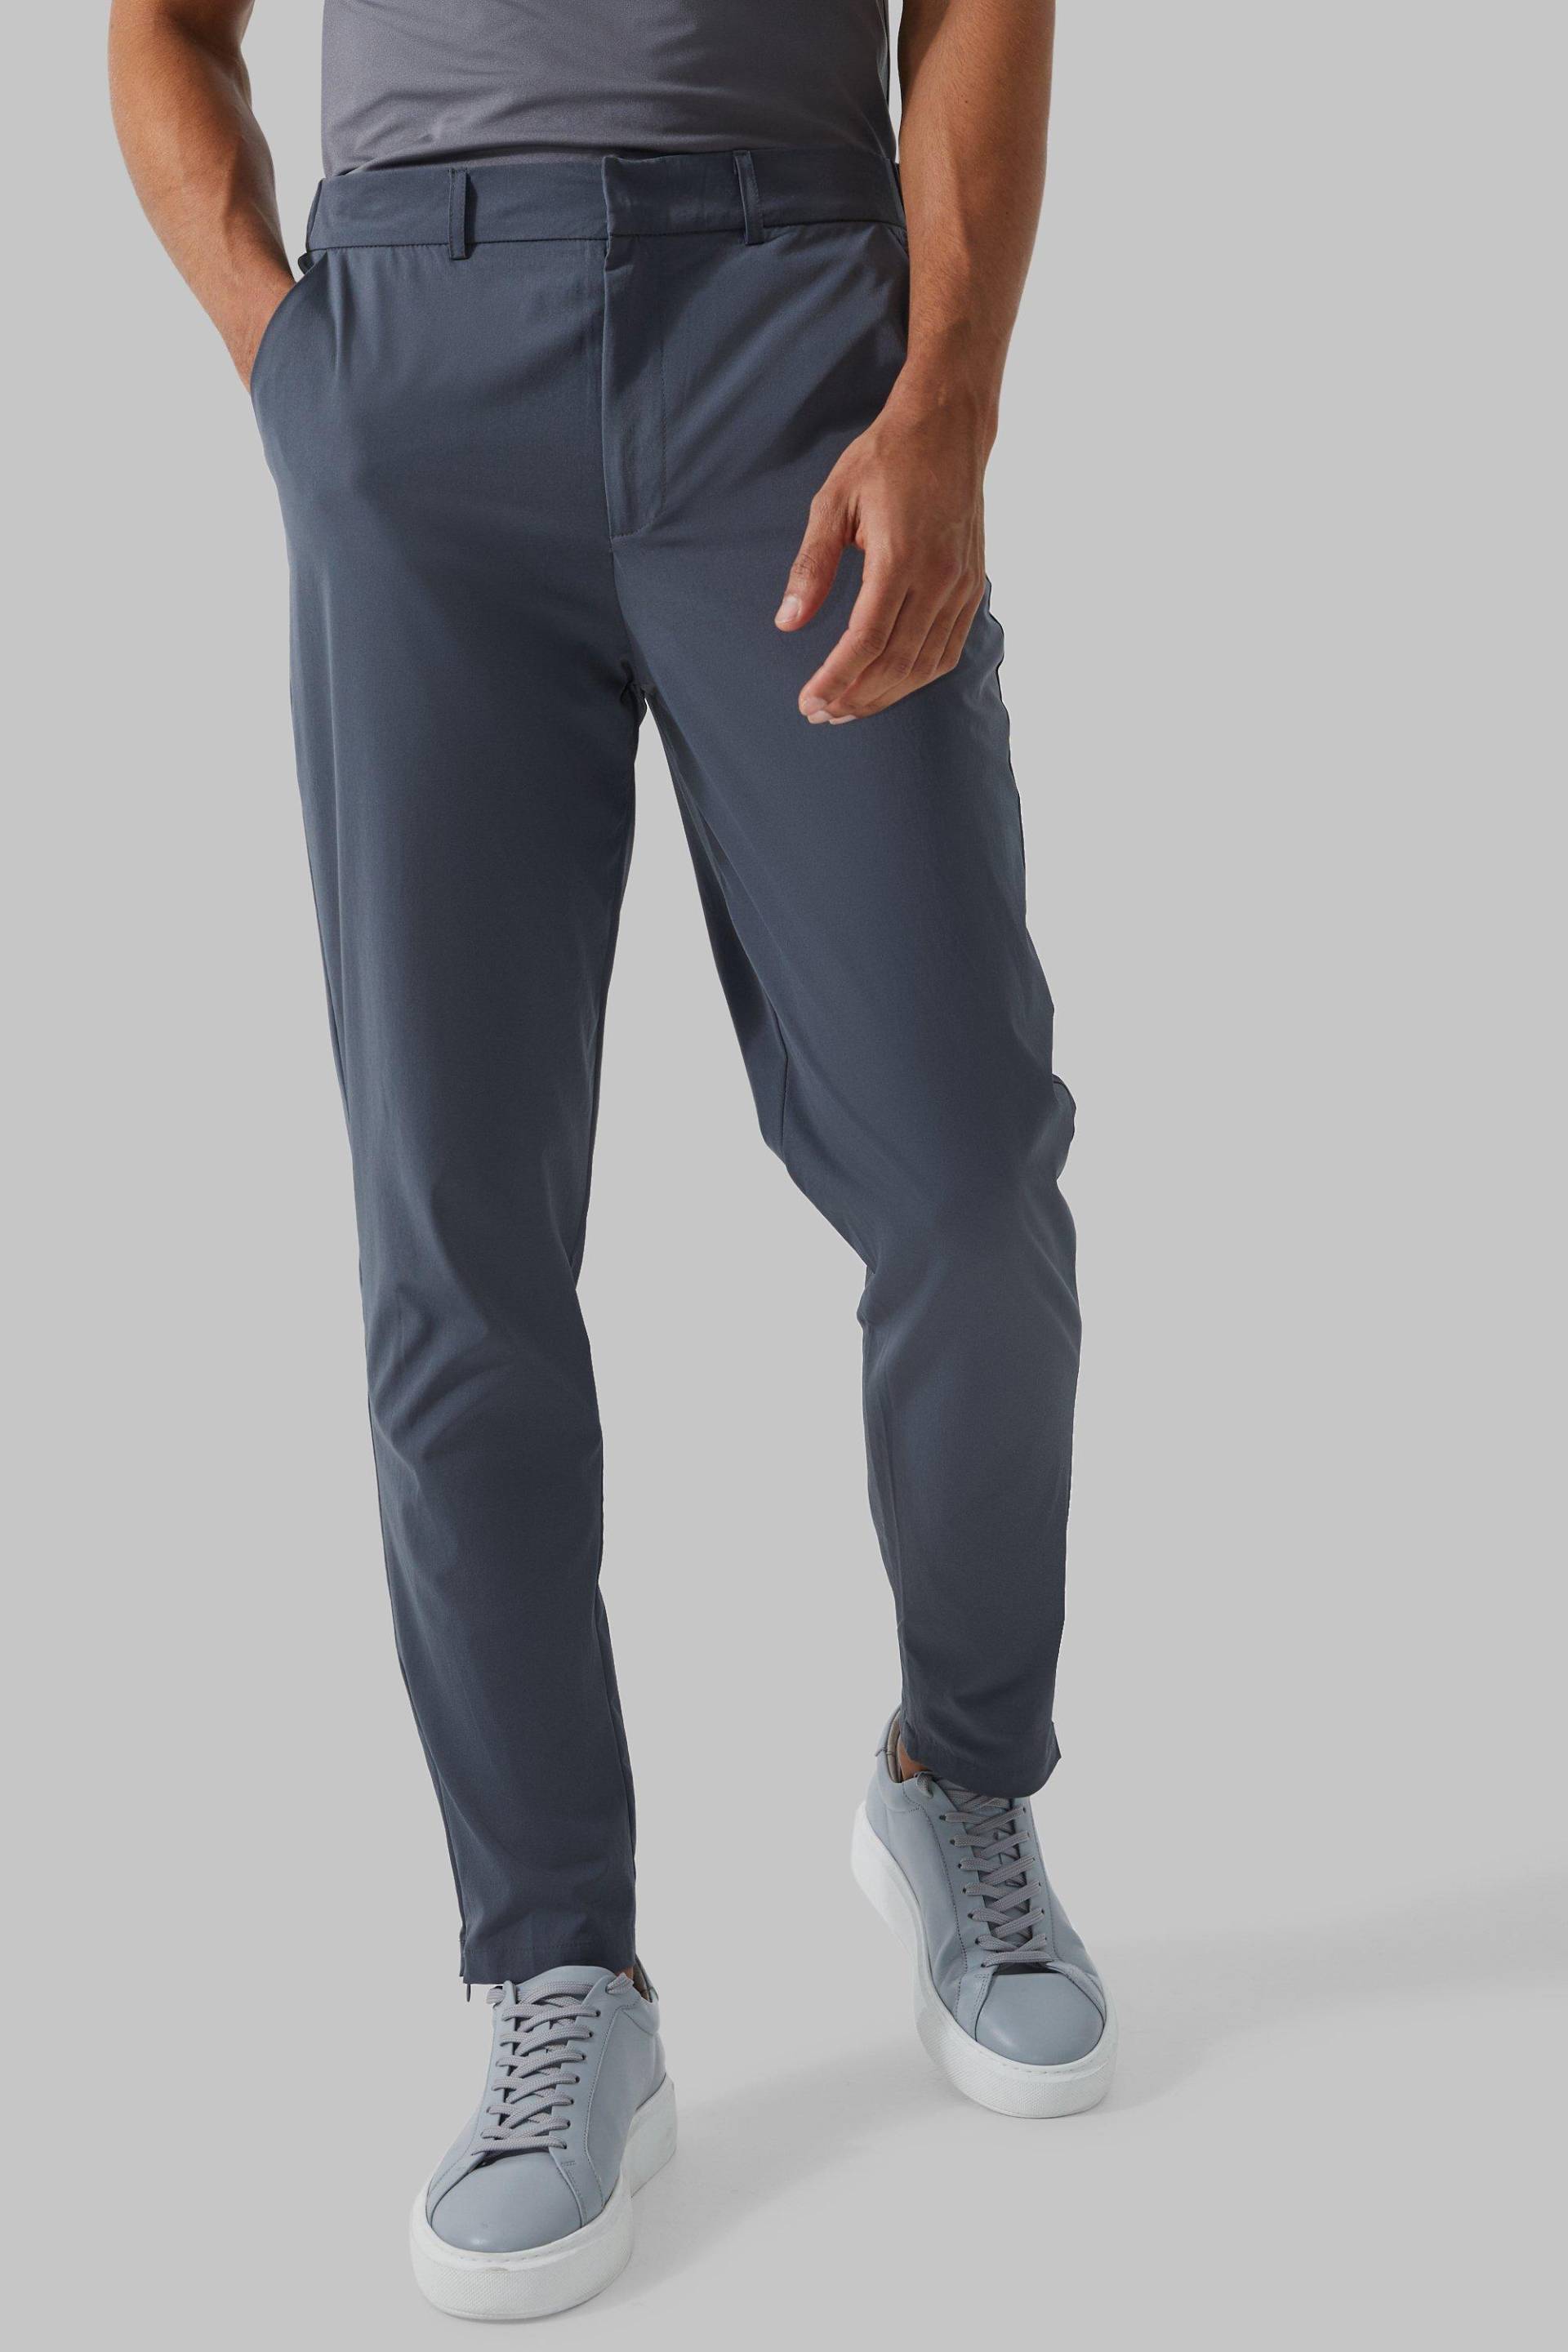 Man Active Stretch Golf Hose - Charcoal - S, Charcoal von boohoo